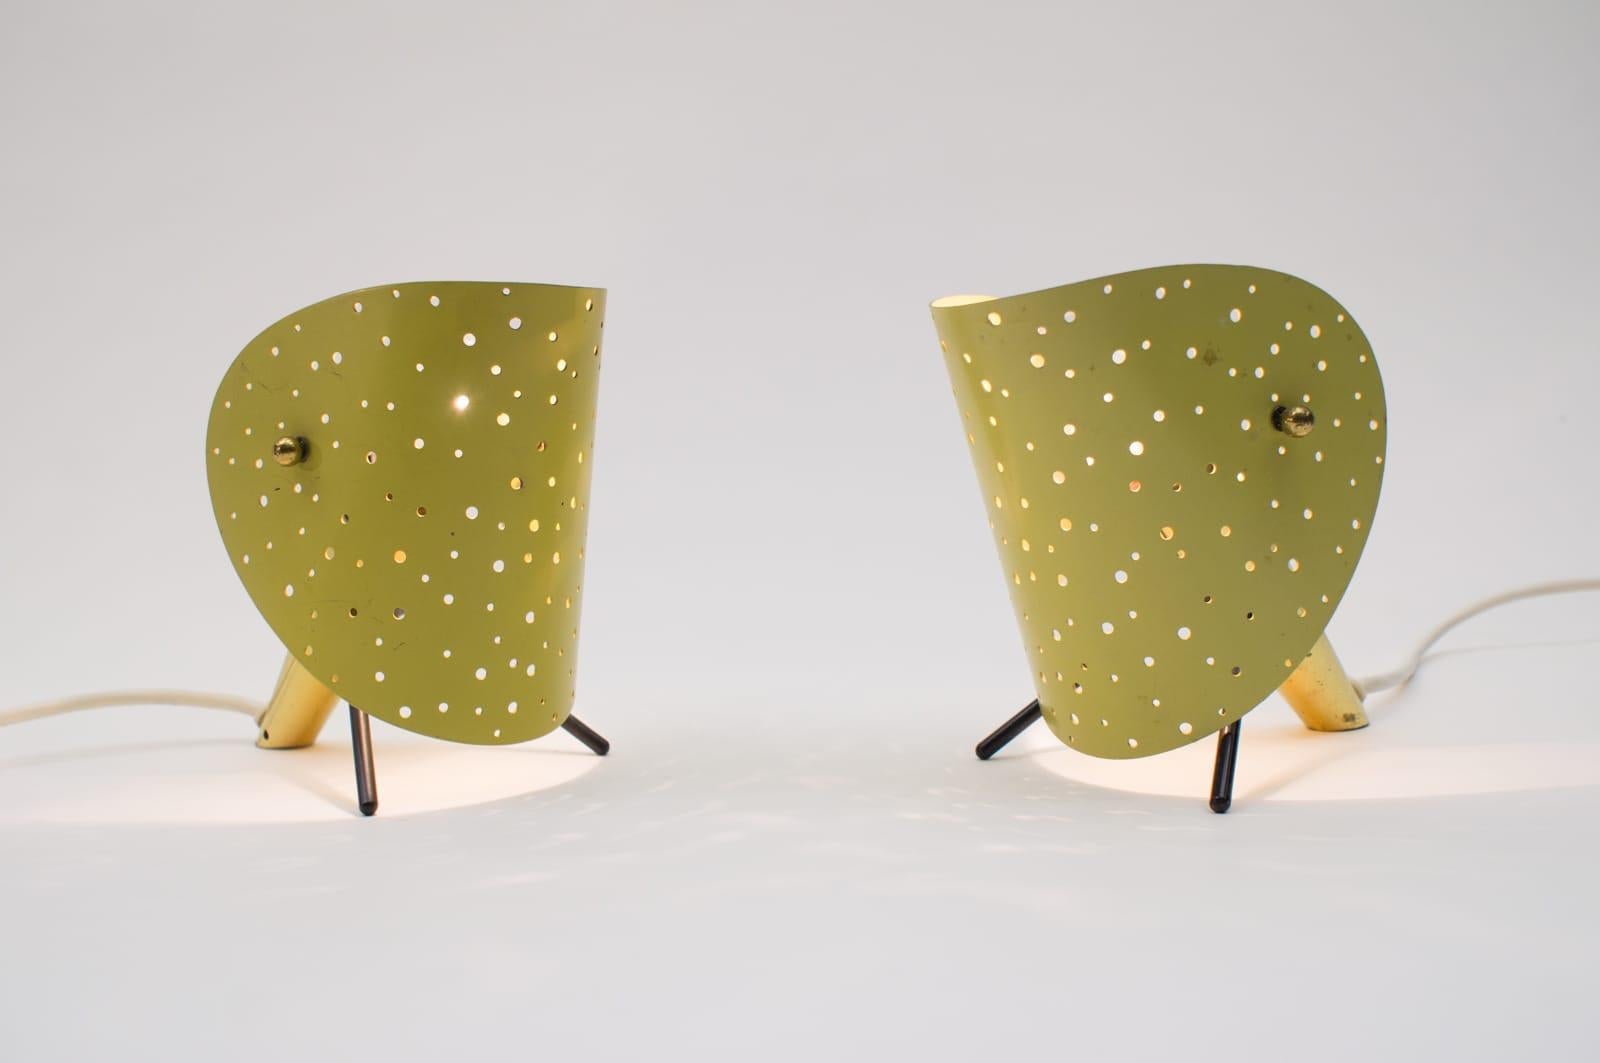 Mid-Century Modern Table Lamps by Ernst Igl for Hillebrand, Set of 2, 1950s, Germany For Sale